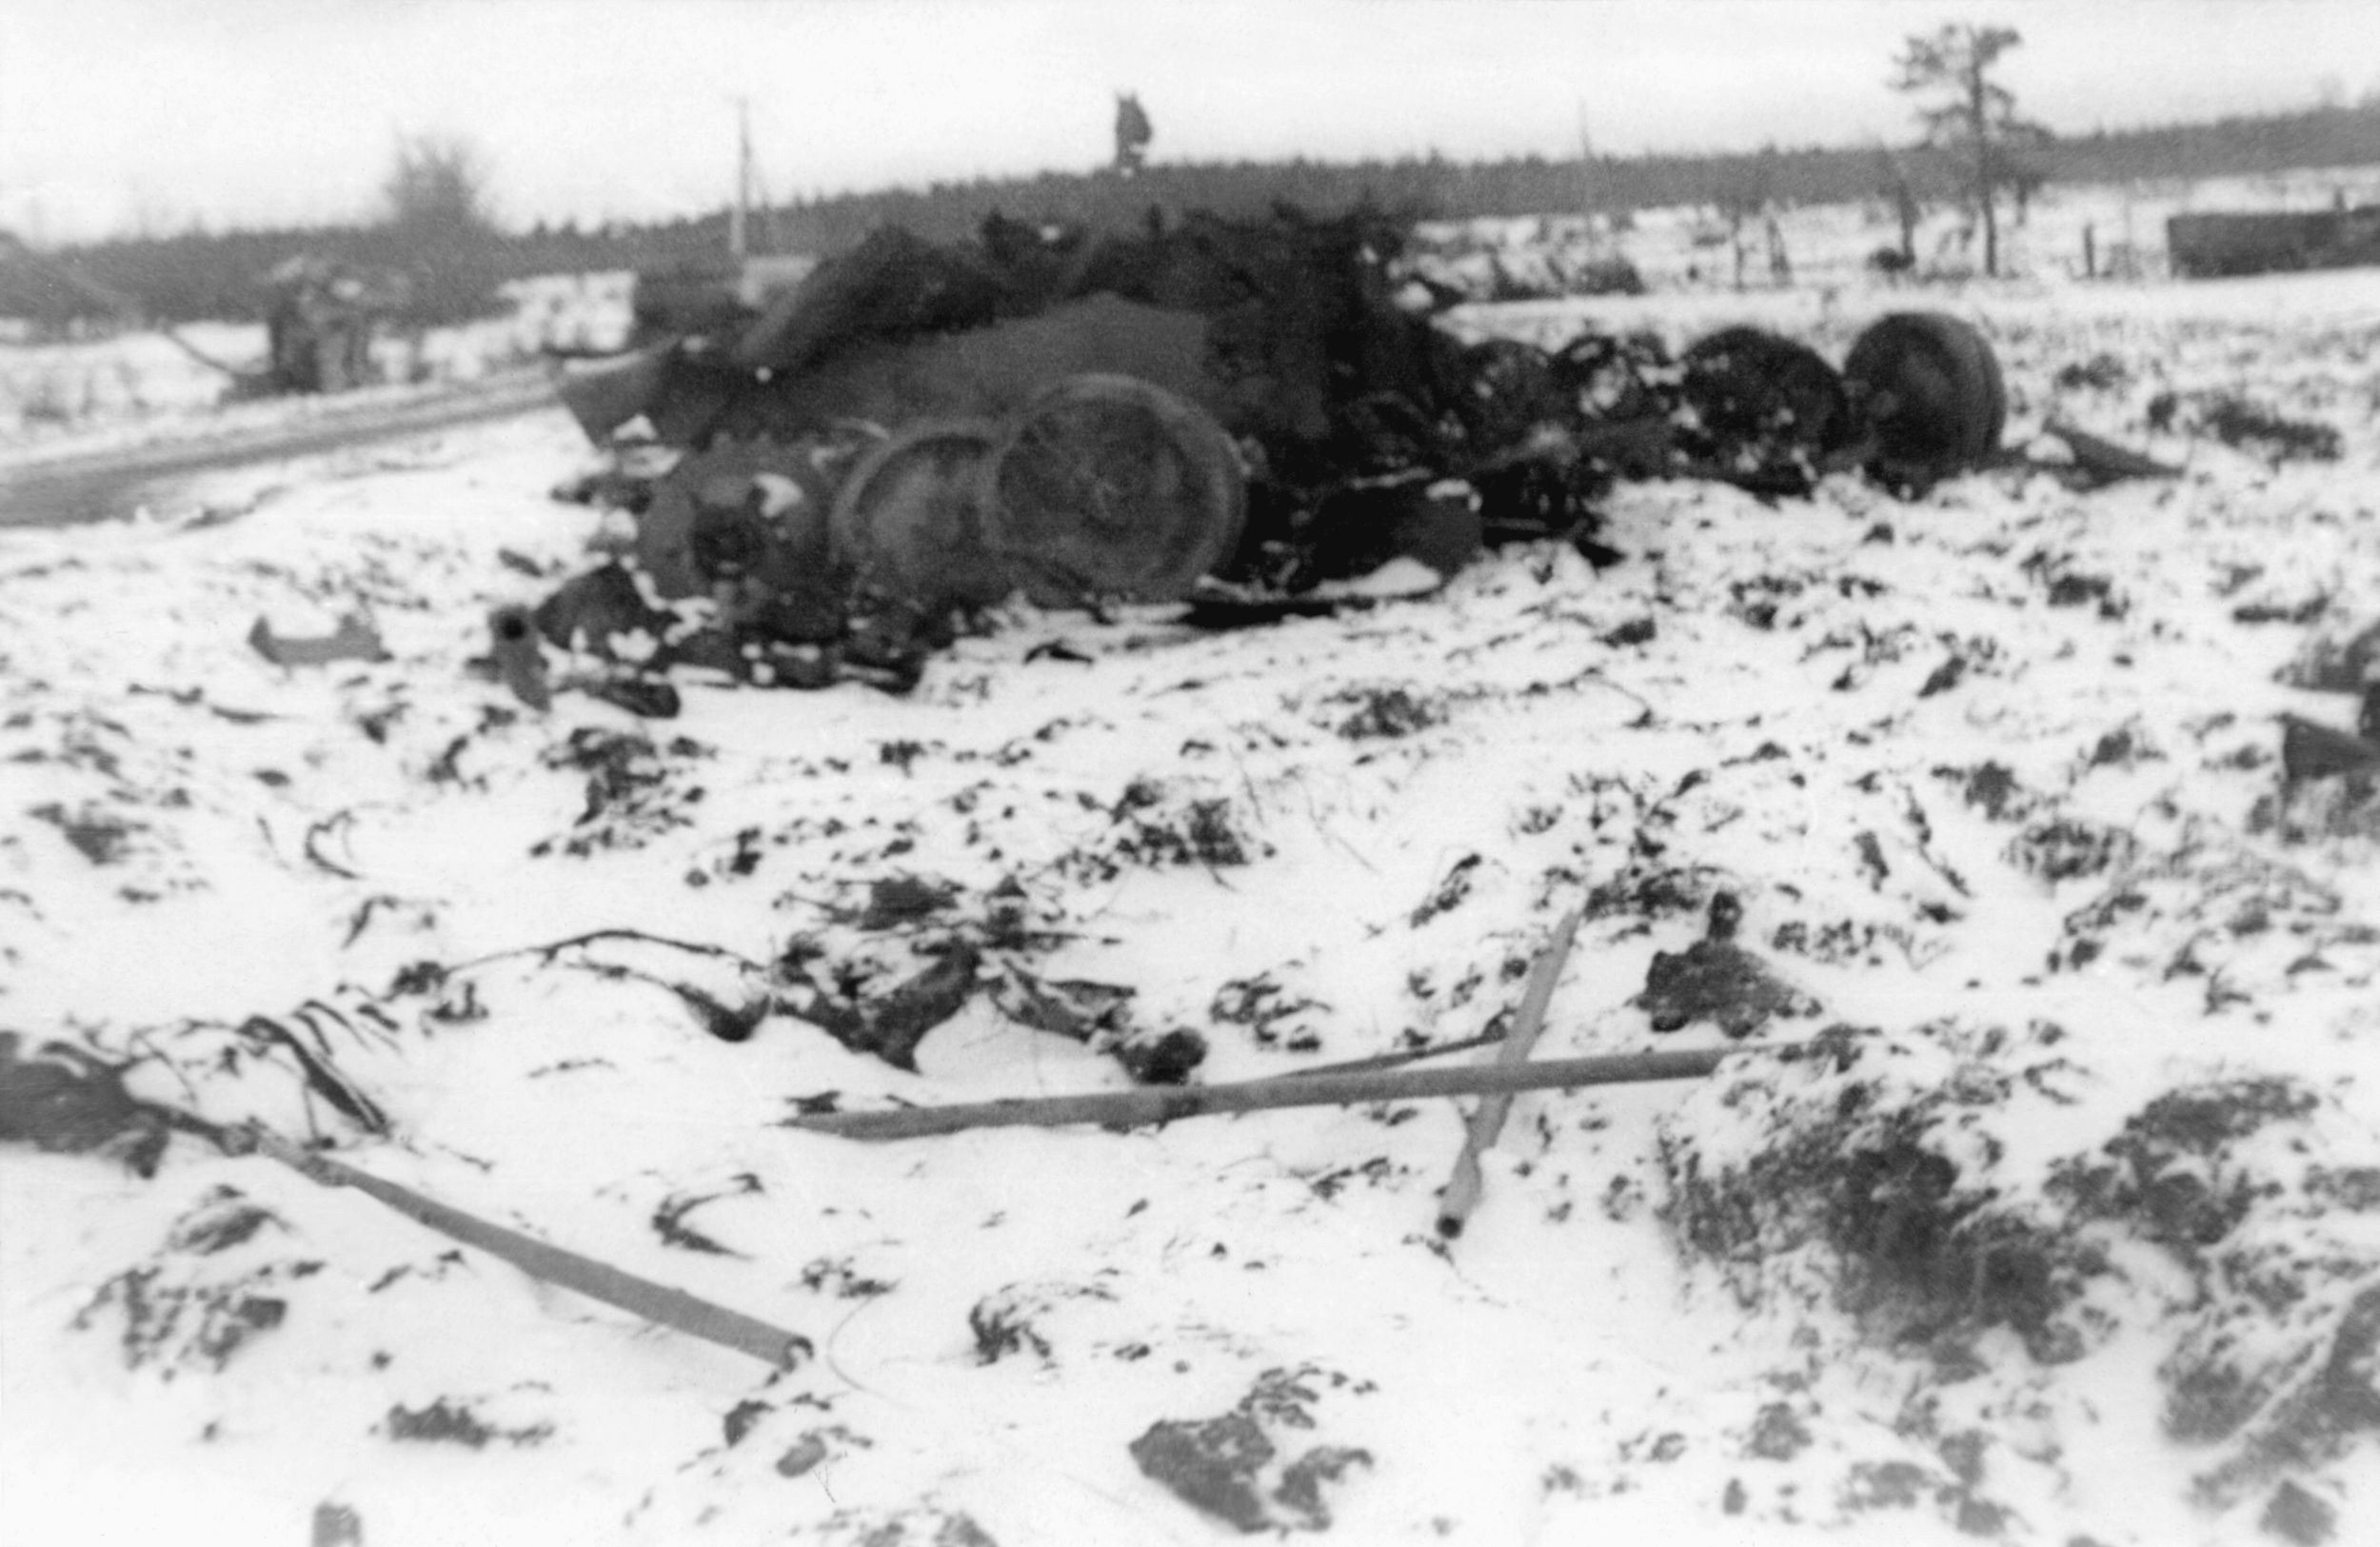 A direct hit from an artillery shell destroyed this Panther in the area held by Company A. Accurate artillery fire was critical in slowing the German advance at Lausdell.